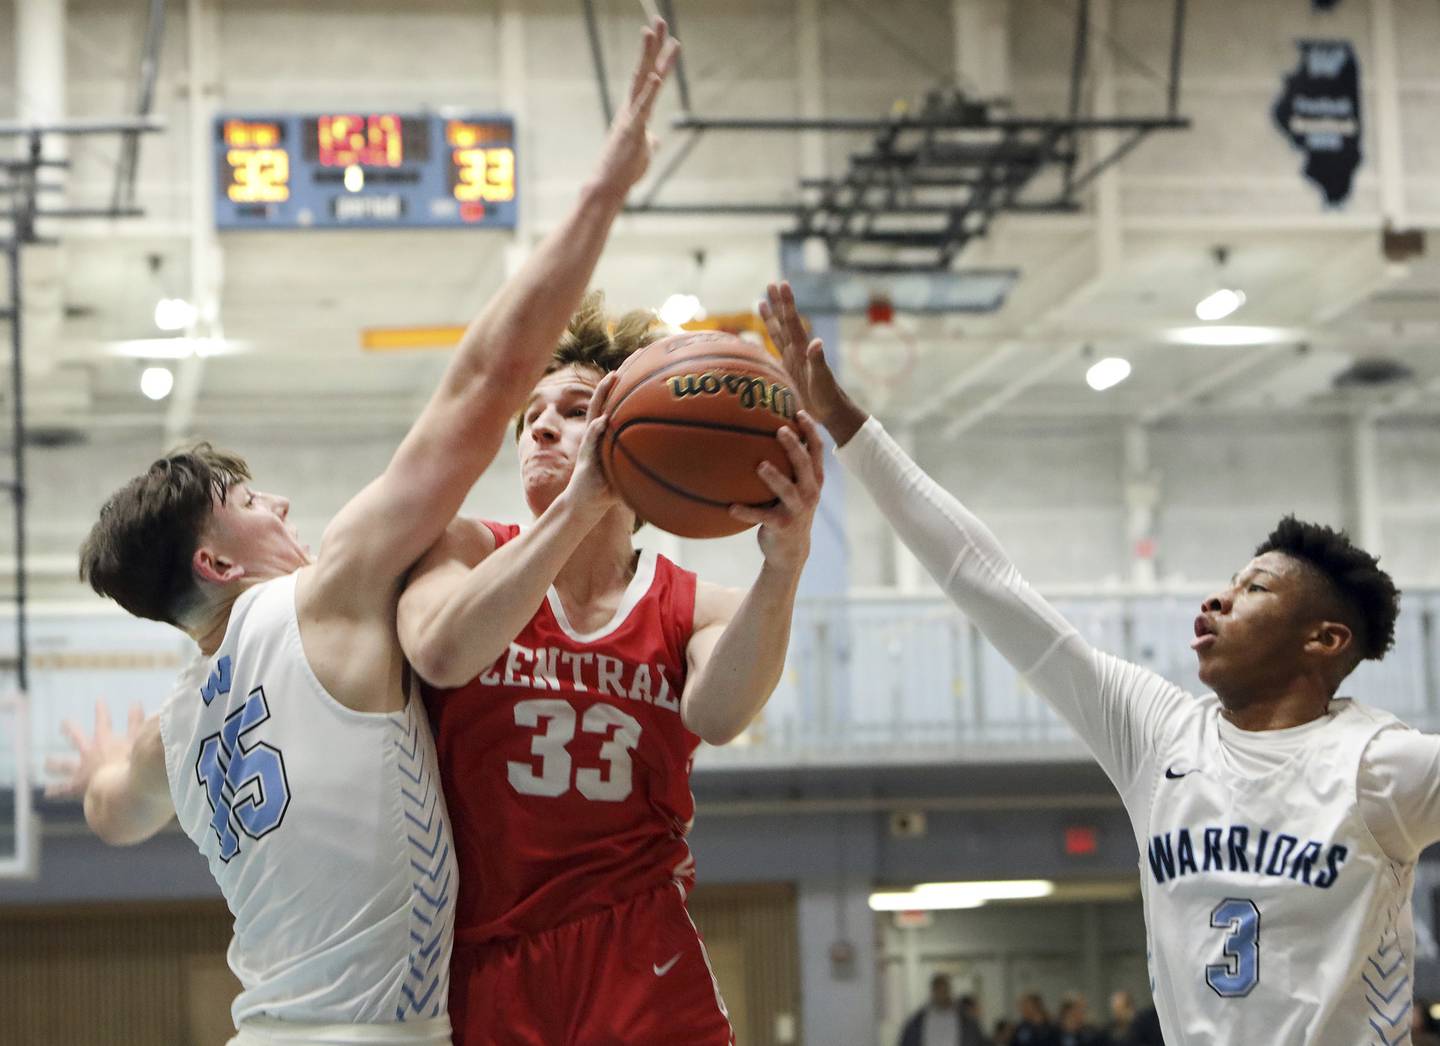 Naperville Central’s Ross DeZur, center, takes the ball to the basket against Willowbrook’s Isaac Sobieszczyk, left, and Tyler Royal during a game in Villa Park on Wednesday, Dec. 7, 2022. 